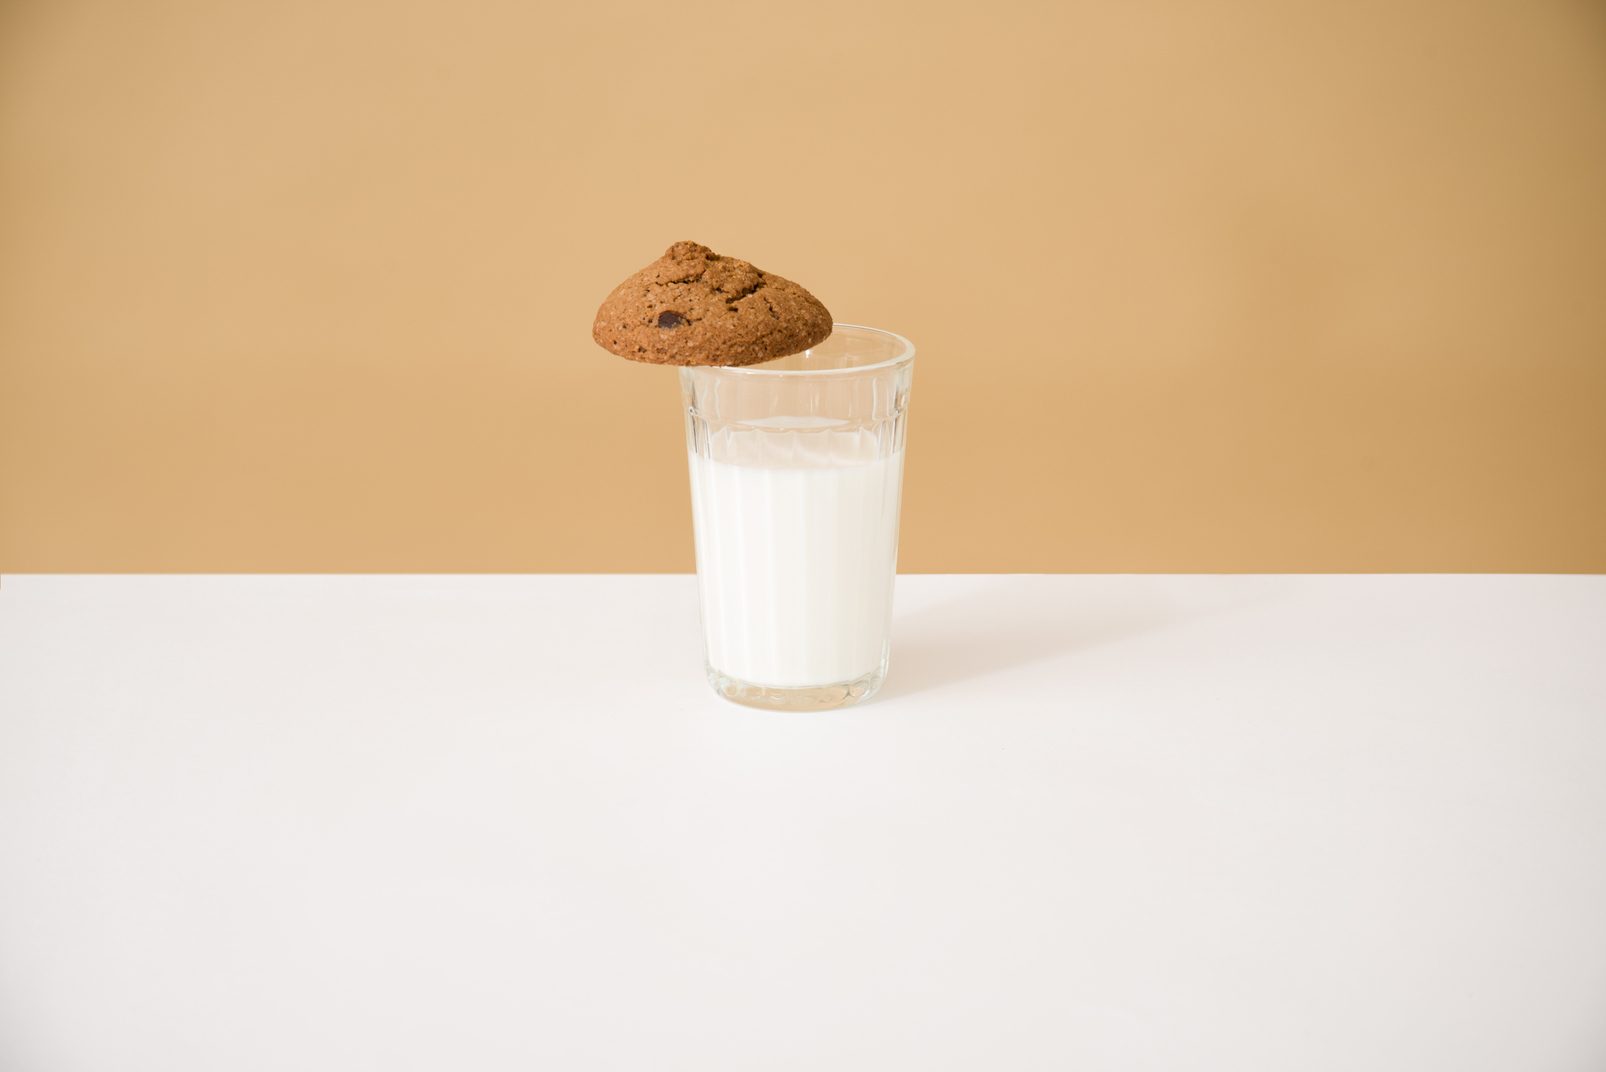 World milk day 2021: there is a glass of milk on the table, there are cookies on the glass